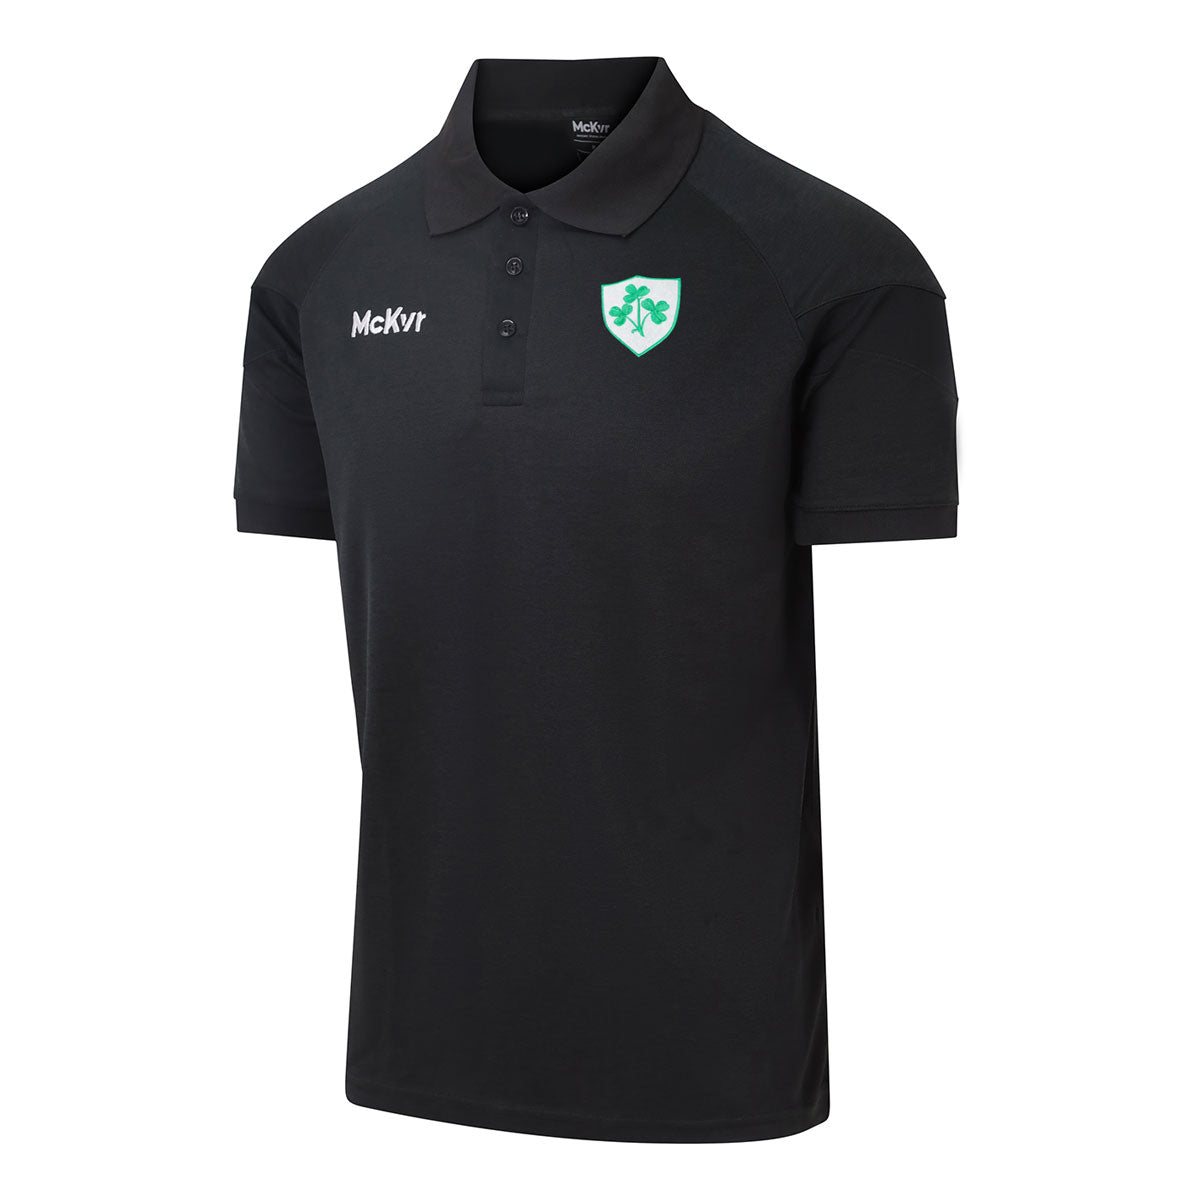 Mc Keever Ireland Supporters Core 22 Polo Top - Adult - Black